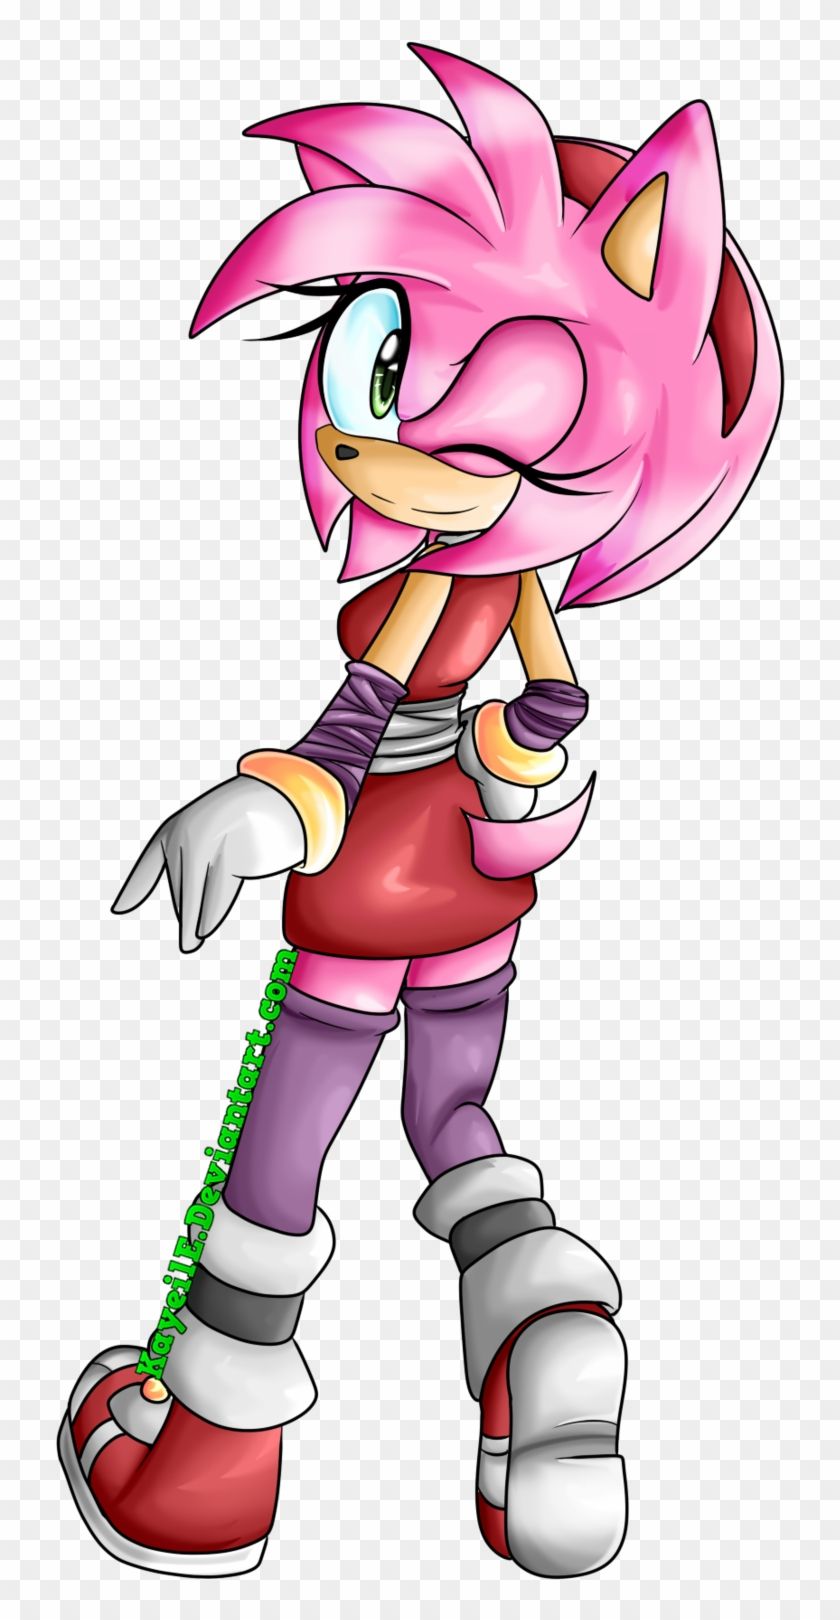 Amy Rose By Kayeile Rose Sonic Boom Transparent PNG Clipart Image Download